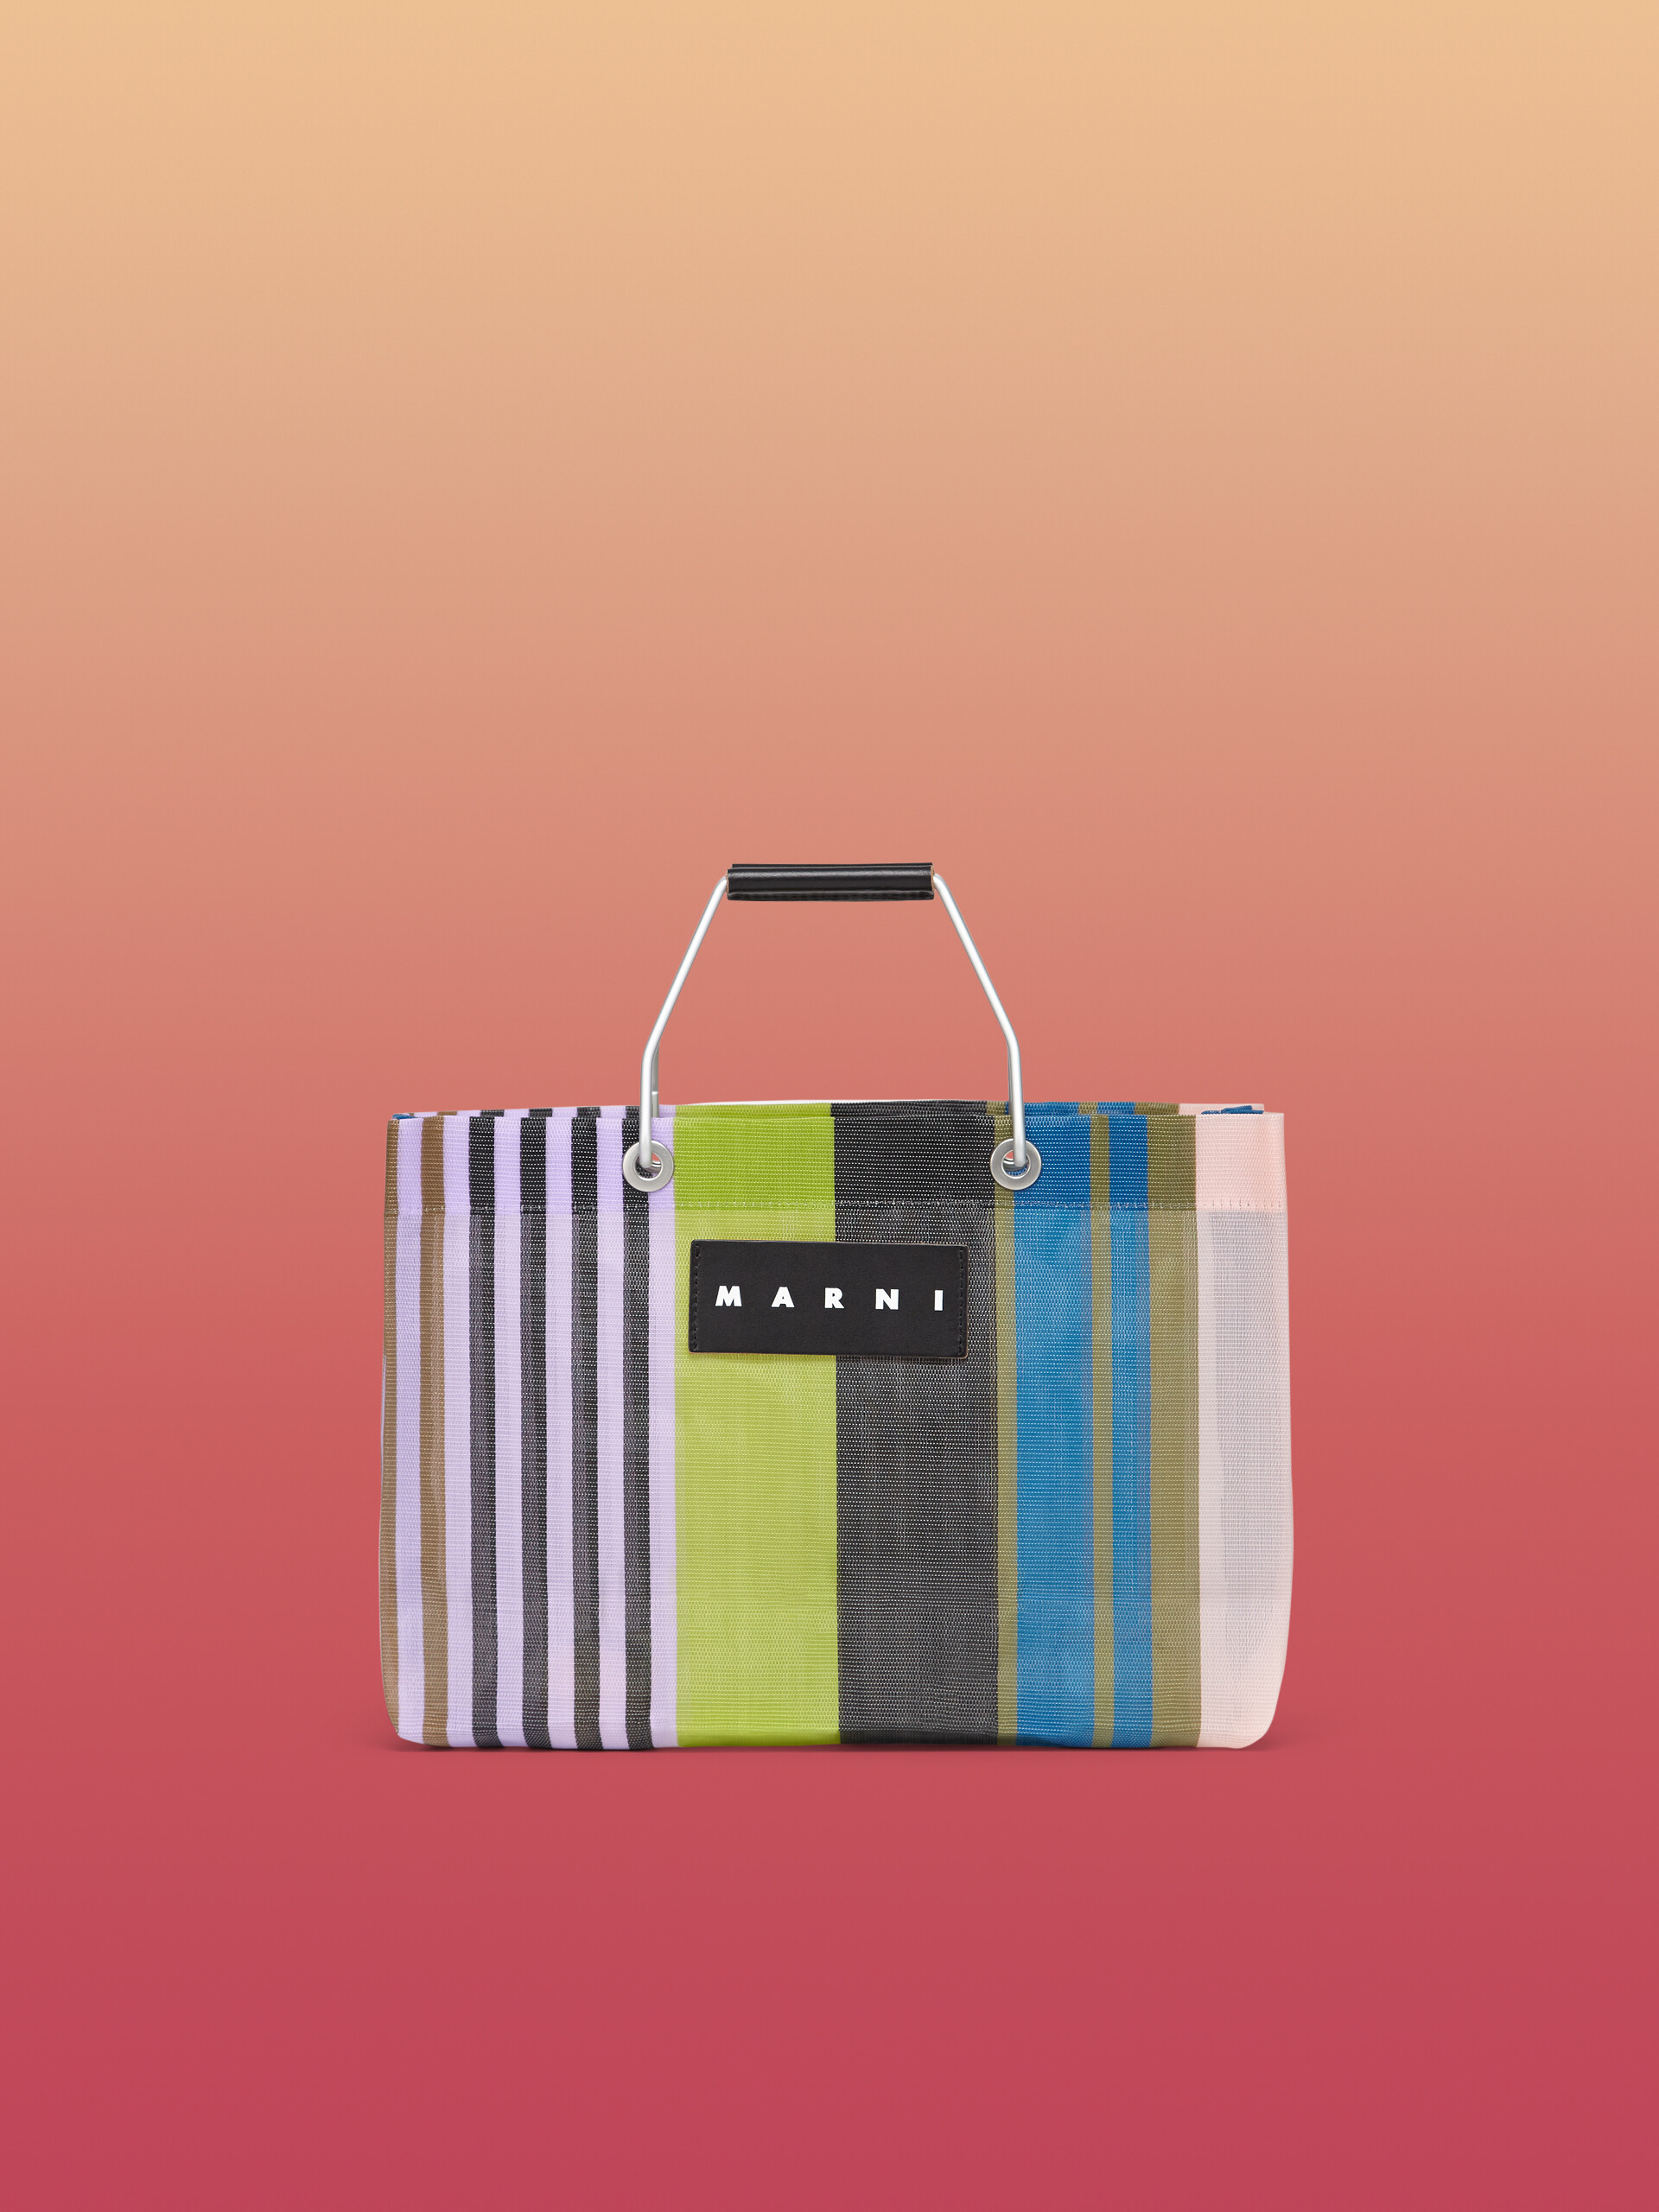 MARNI MARKET shopping bag in striped lilac, green, black, beige and blue polyamide - Bags - Image 1